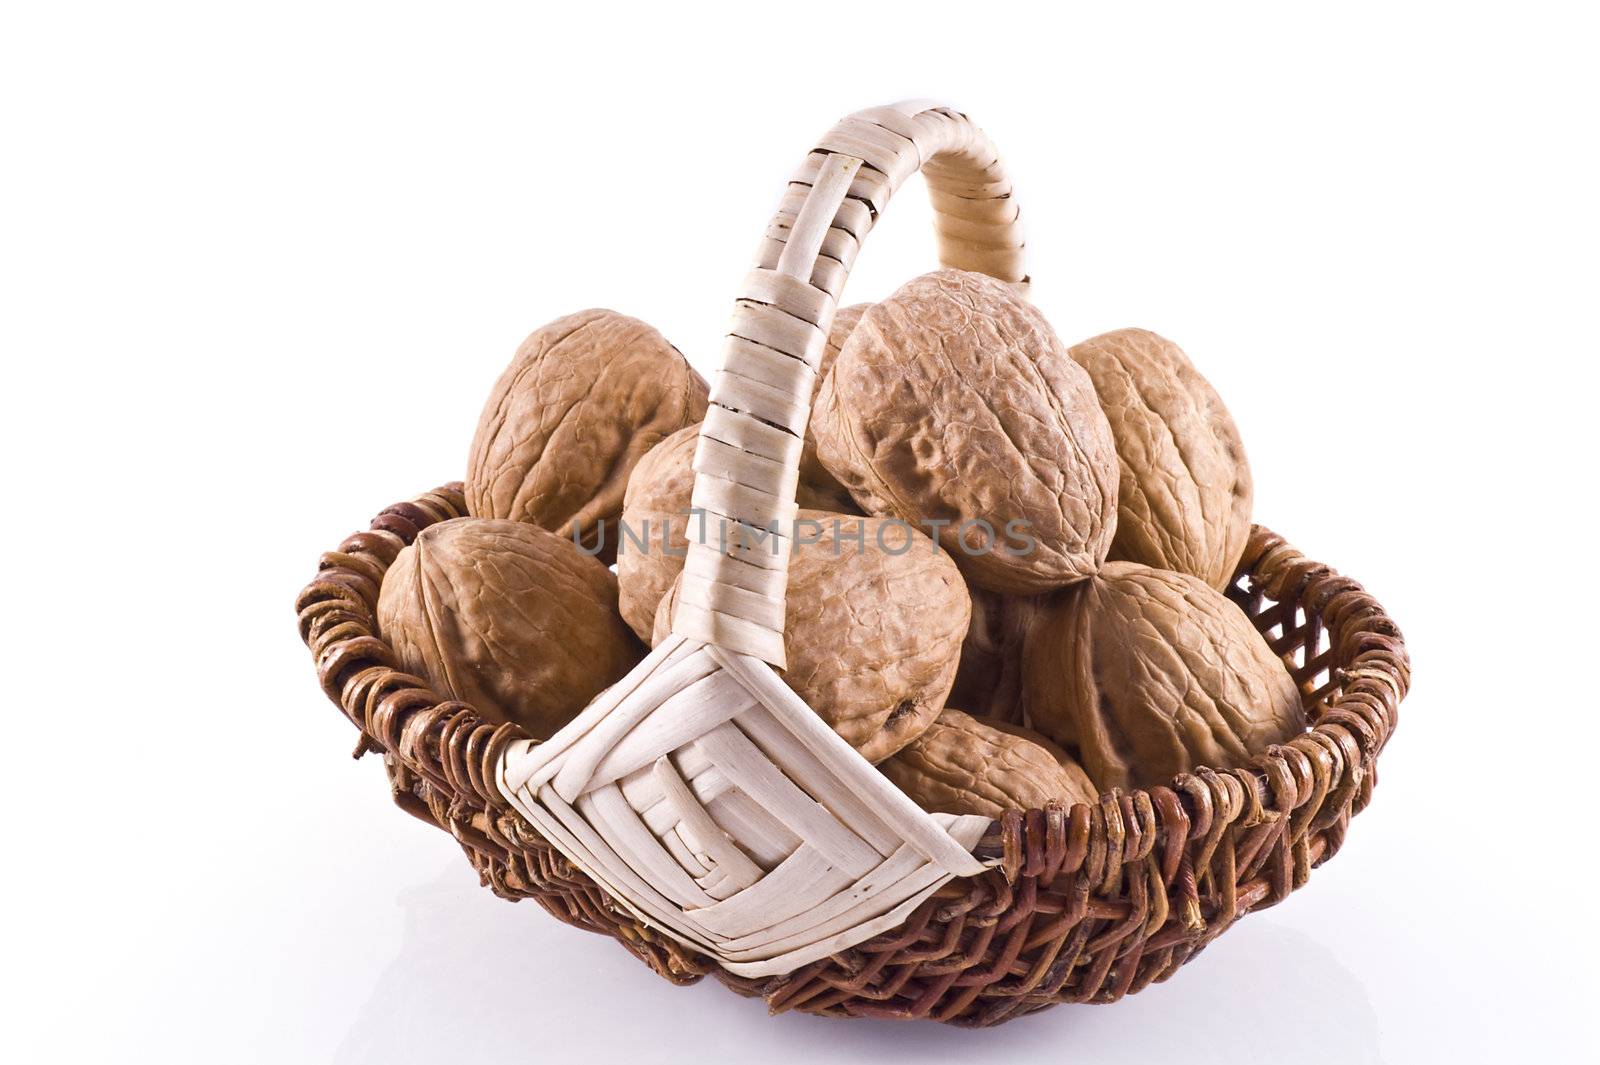 Basket filled with walnuts, isolated on white.